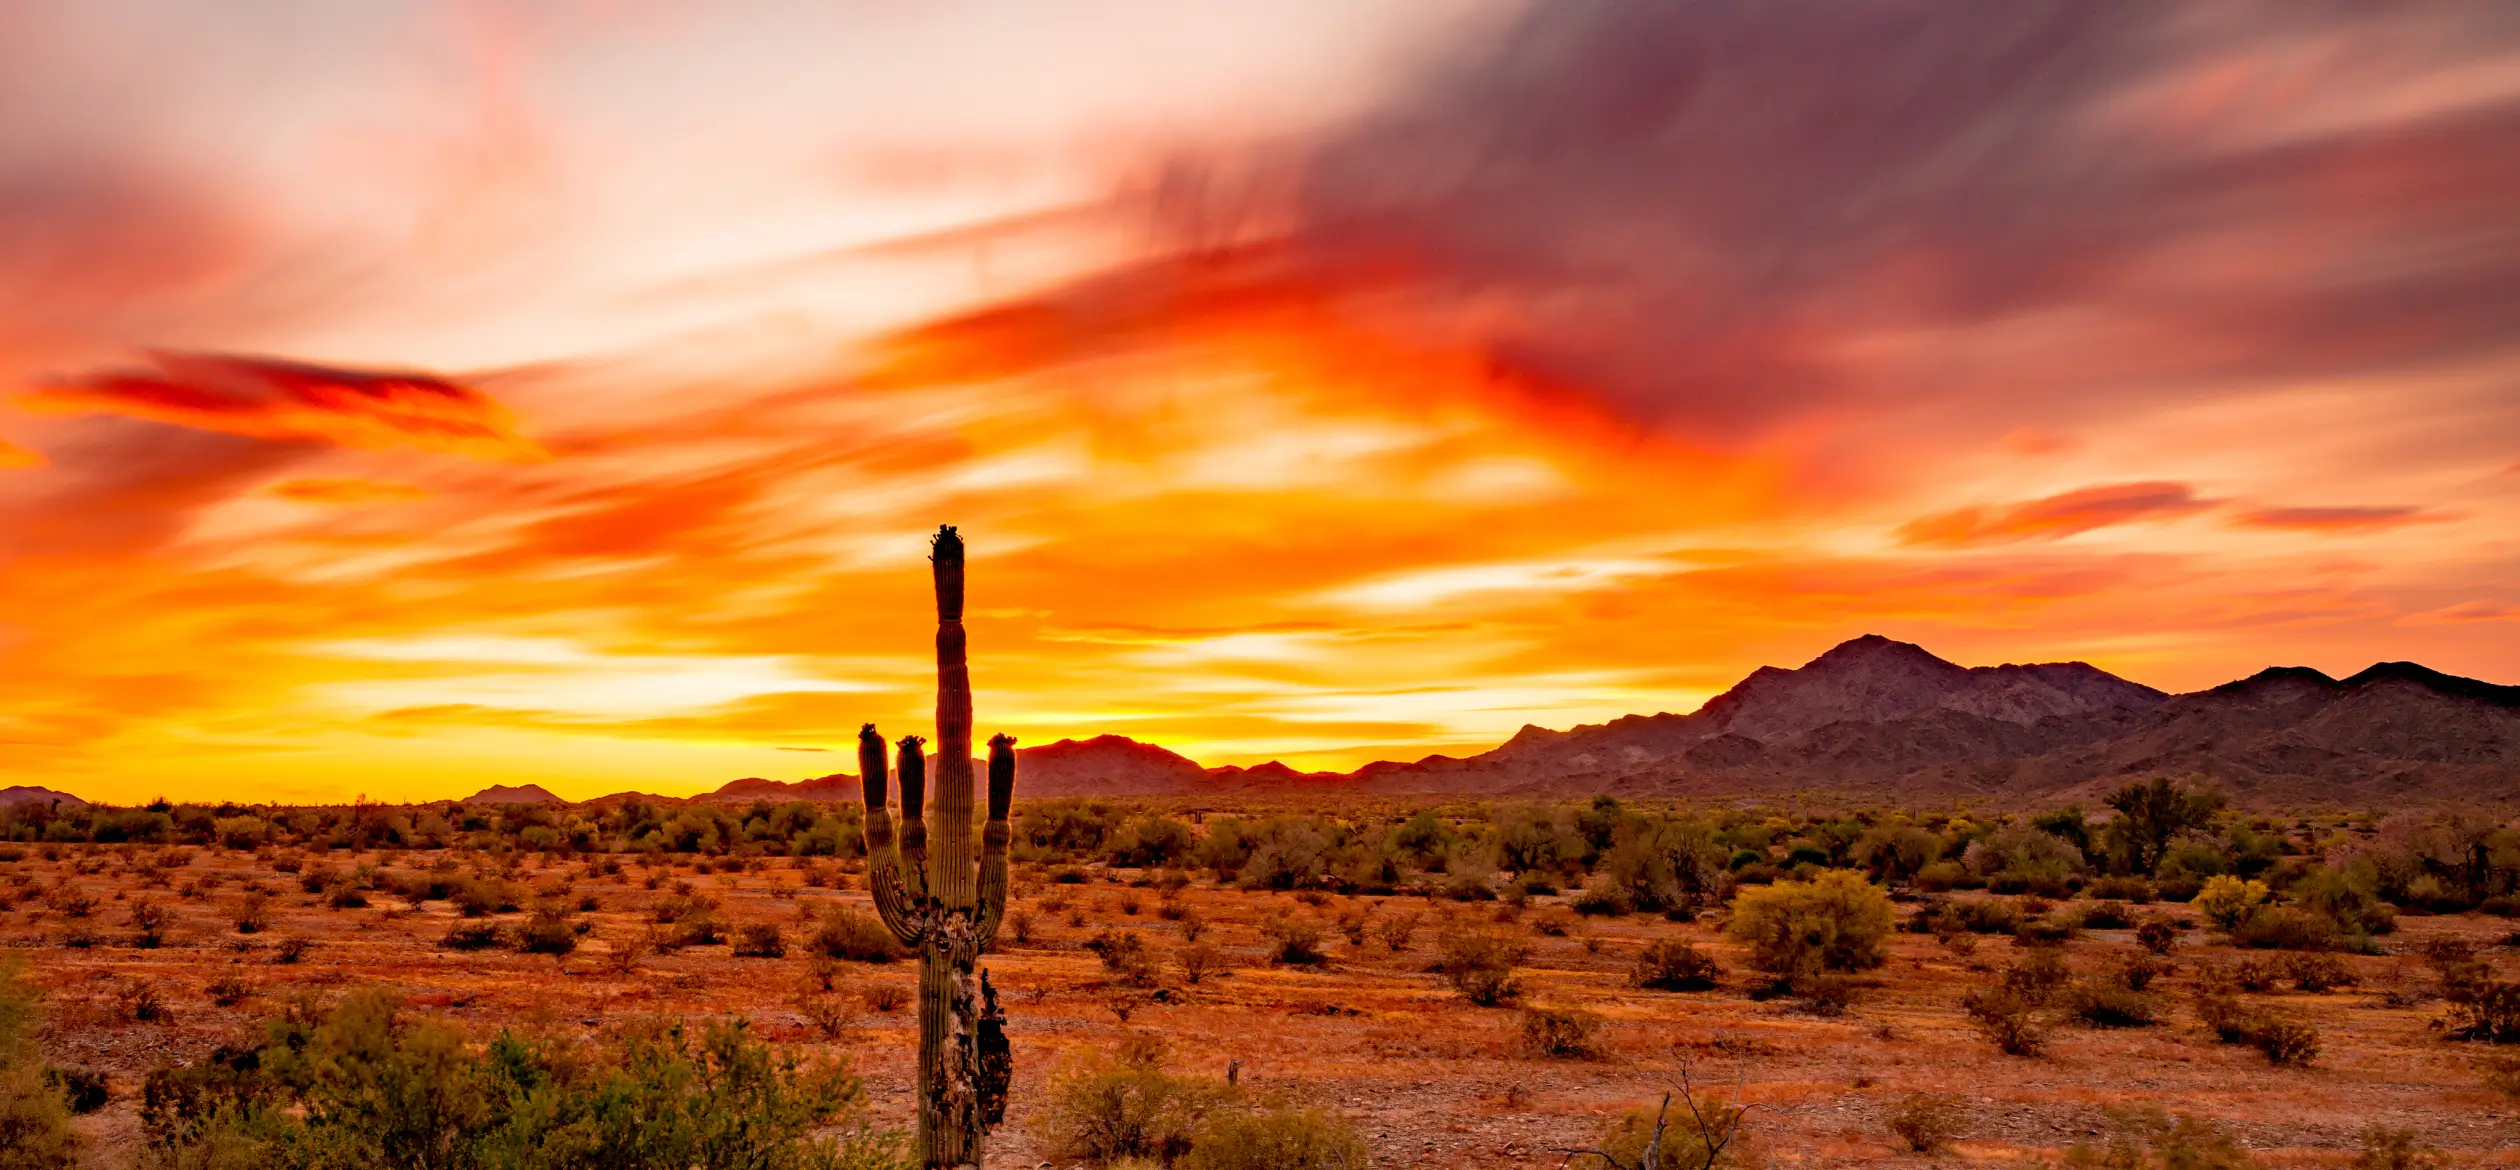 Sunset over desert with saguaro cactus and mountains.